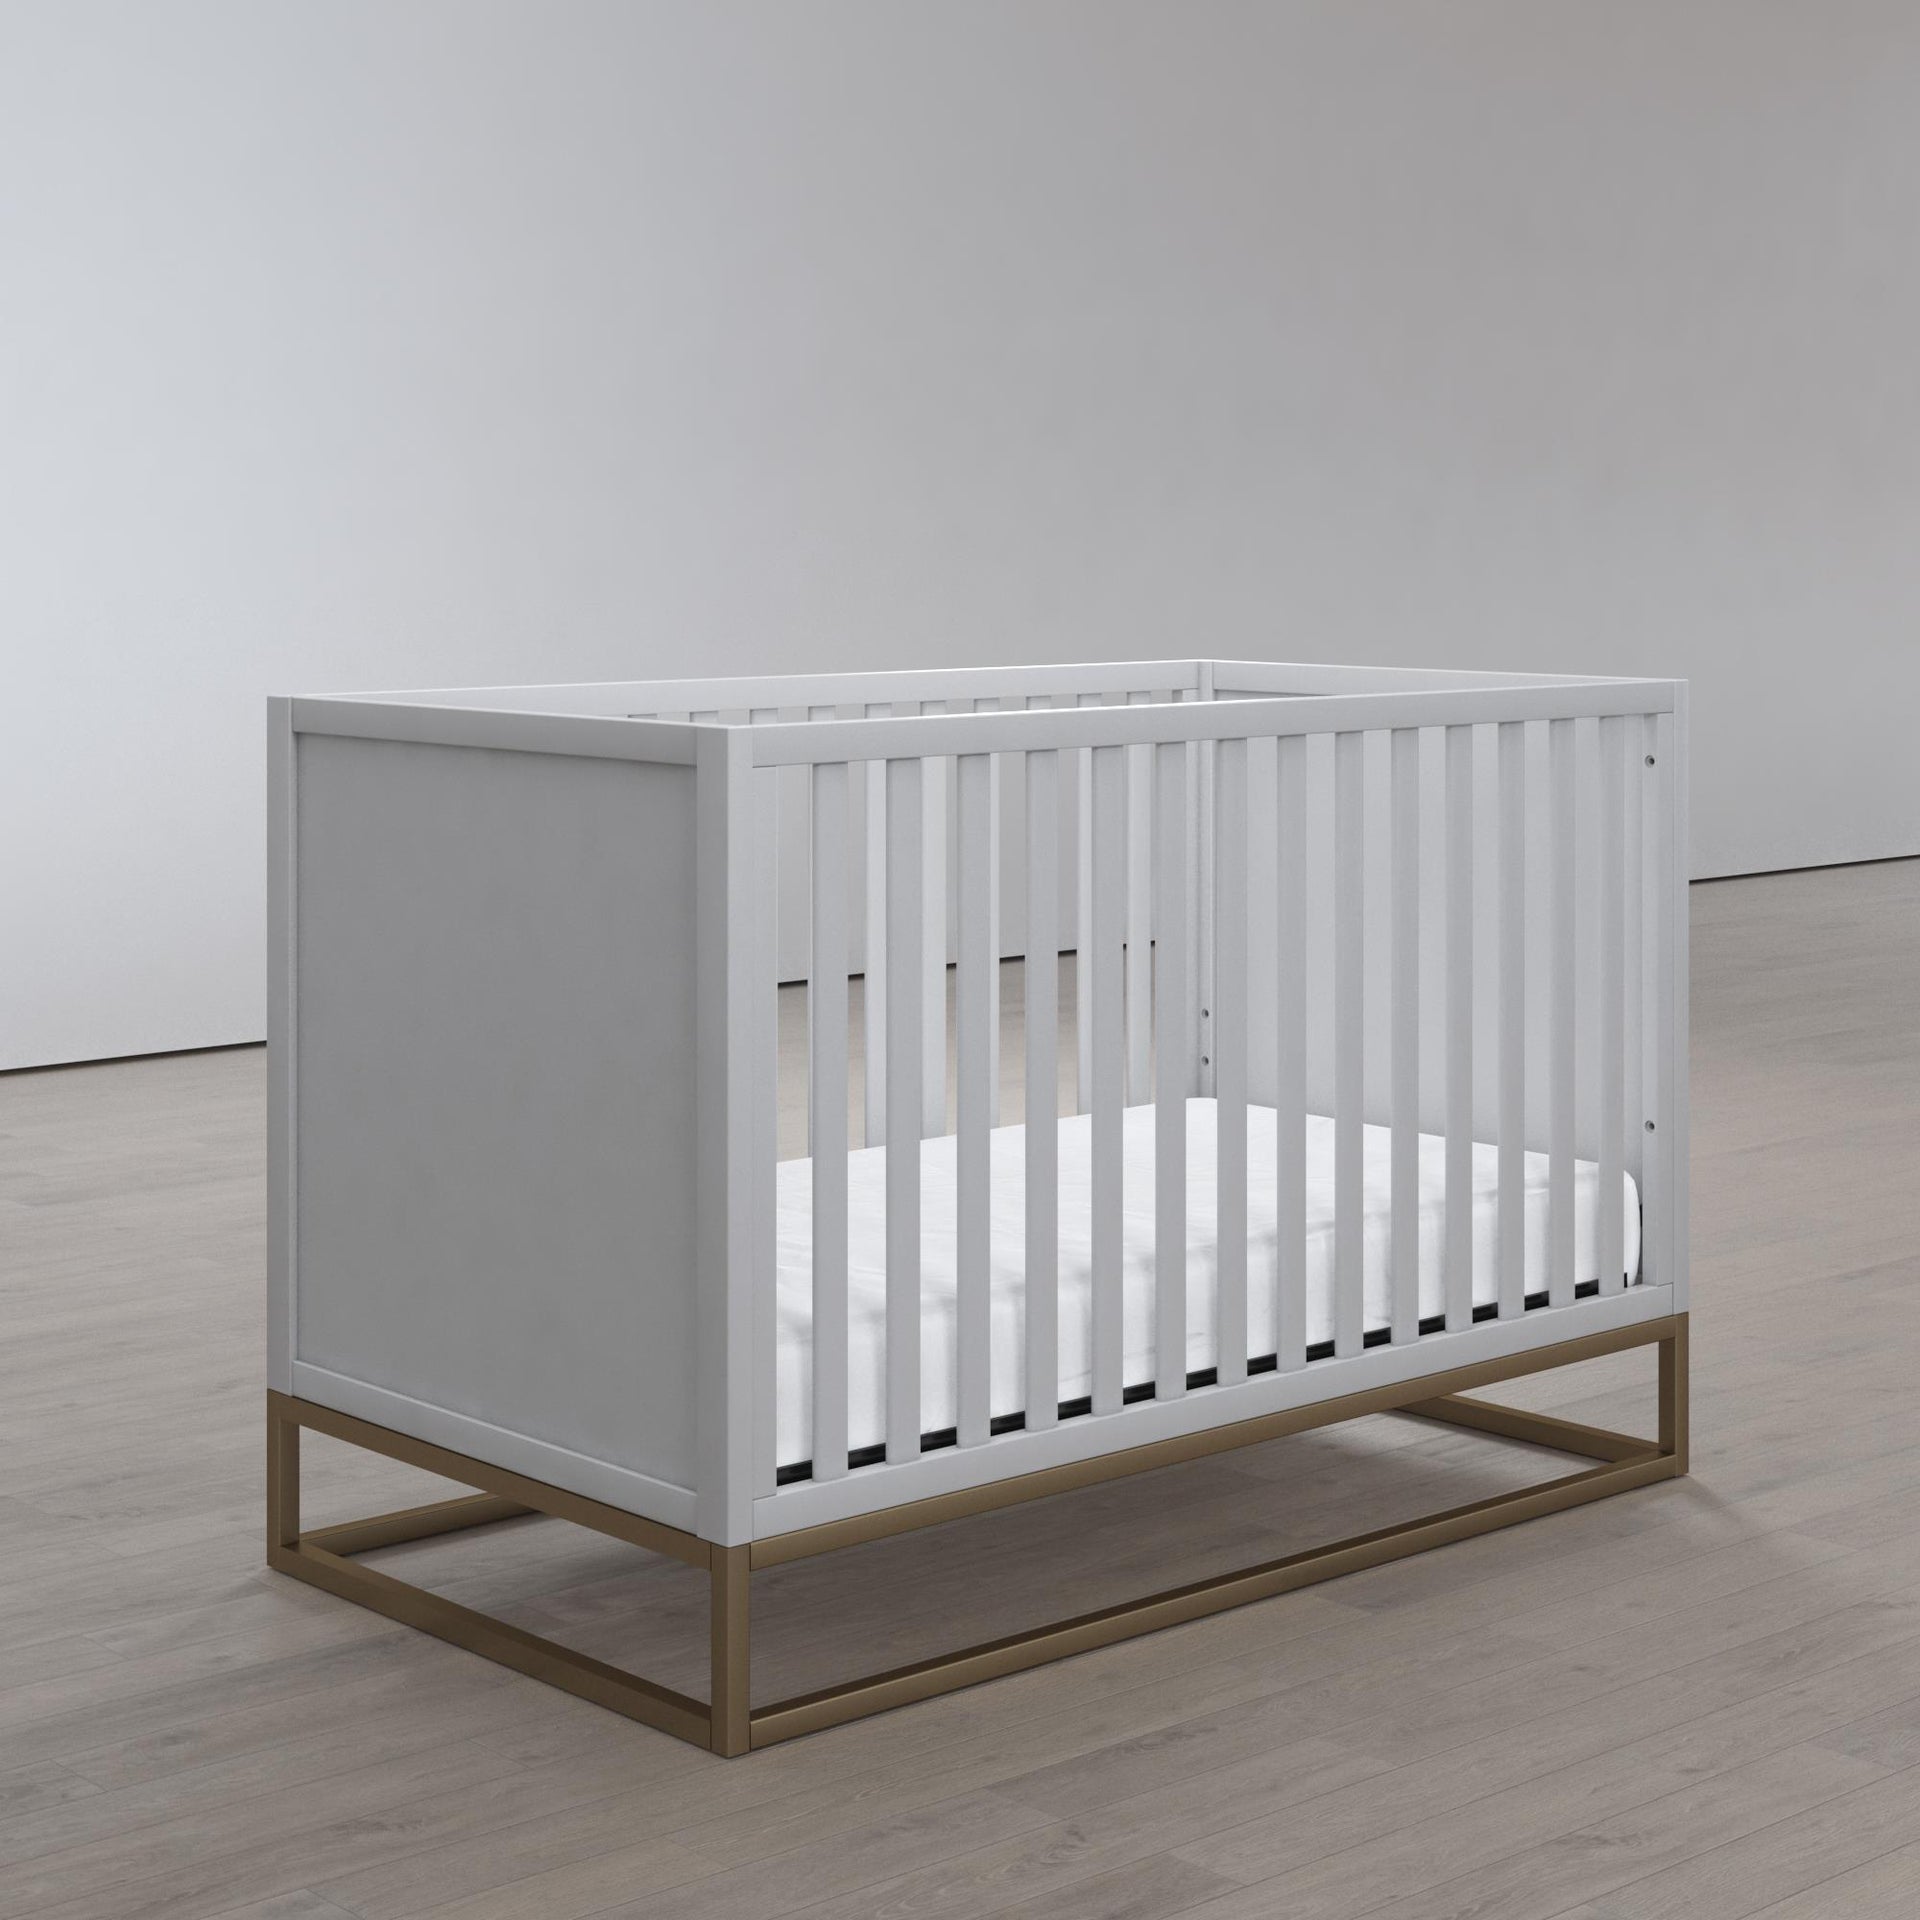 Little Seeds Haven 3 in 1 Metal Base Crib - White